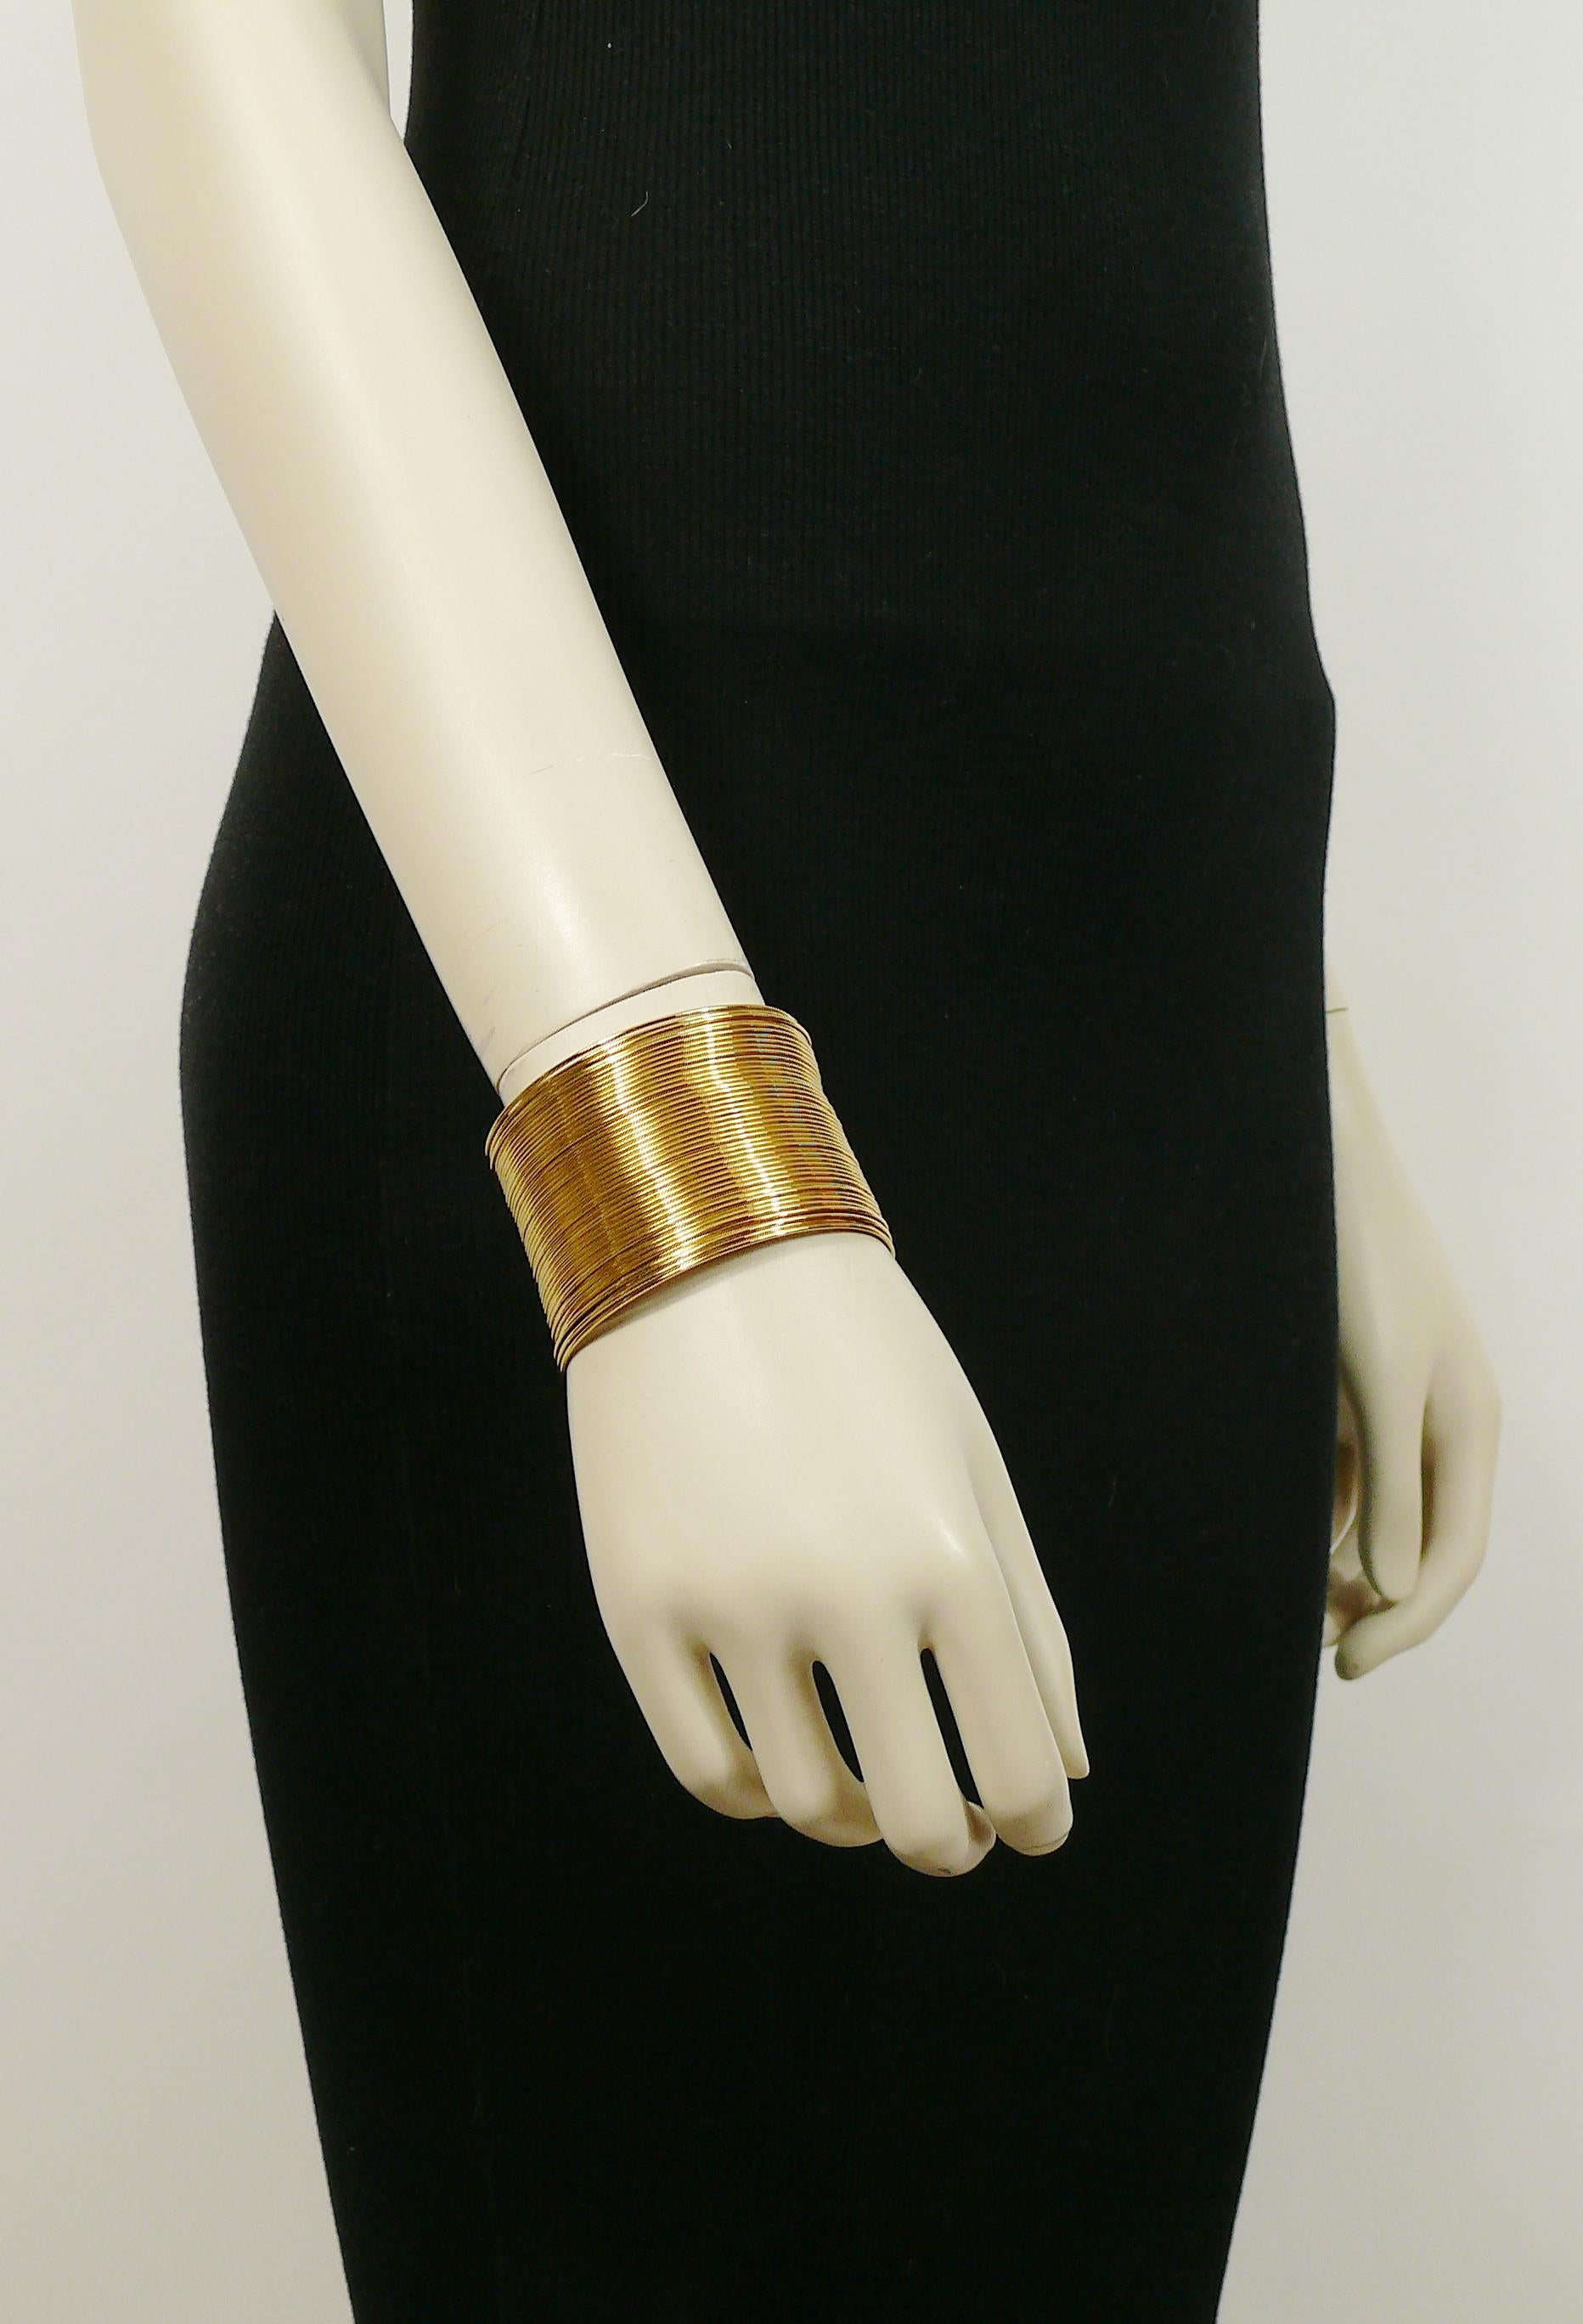 CHRISTIAN DIOR vintage iconic J'ADORE gold toned wire cuff bracelet.

Created by French designer HERVE VAN DER STRAETEN.

Embossed J'ADORE on the hilts.
Embossed DIOR.

Indicative measurements : inner circumference approx. 19.16 cm (7.54 inches) /